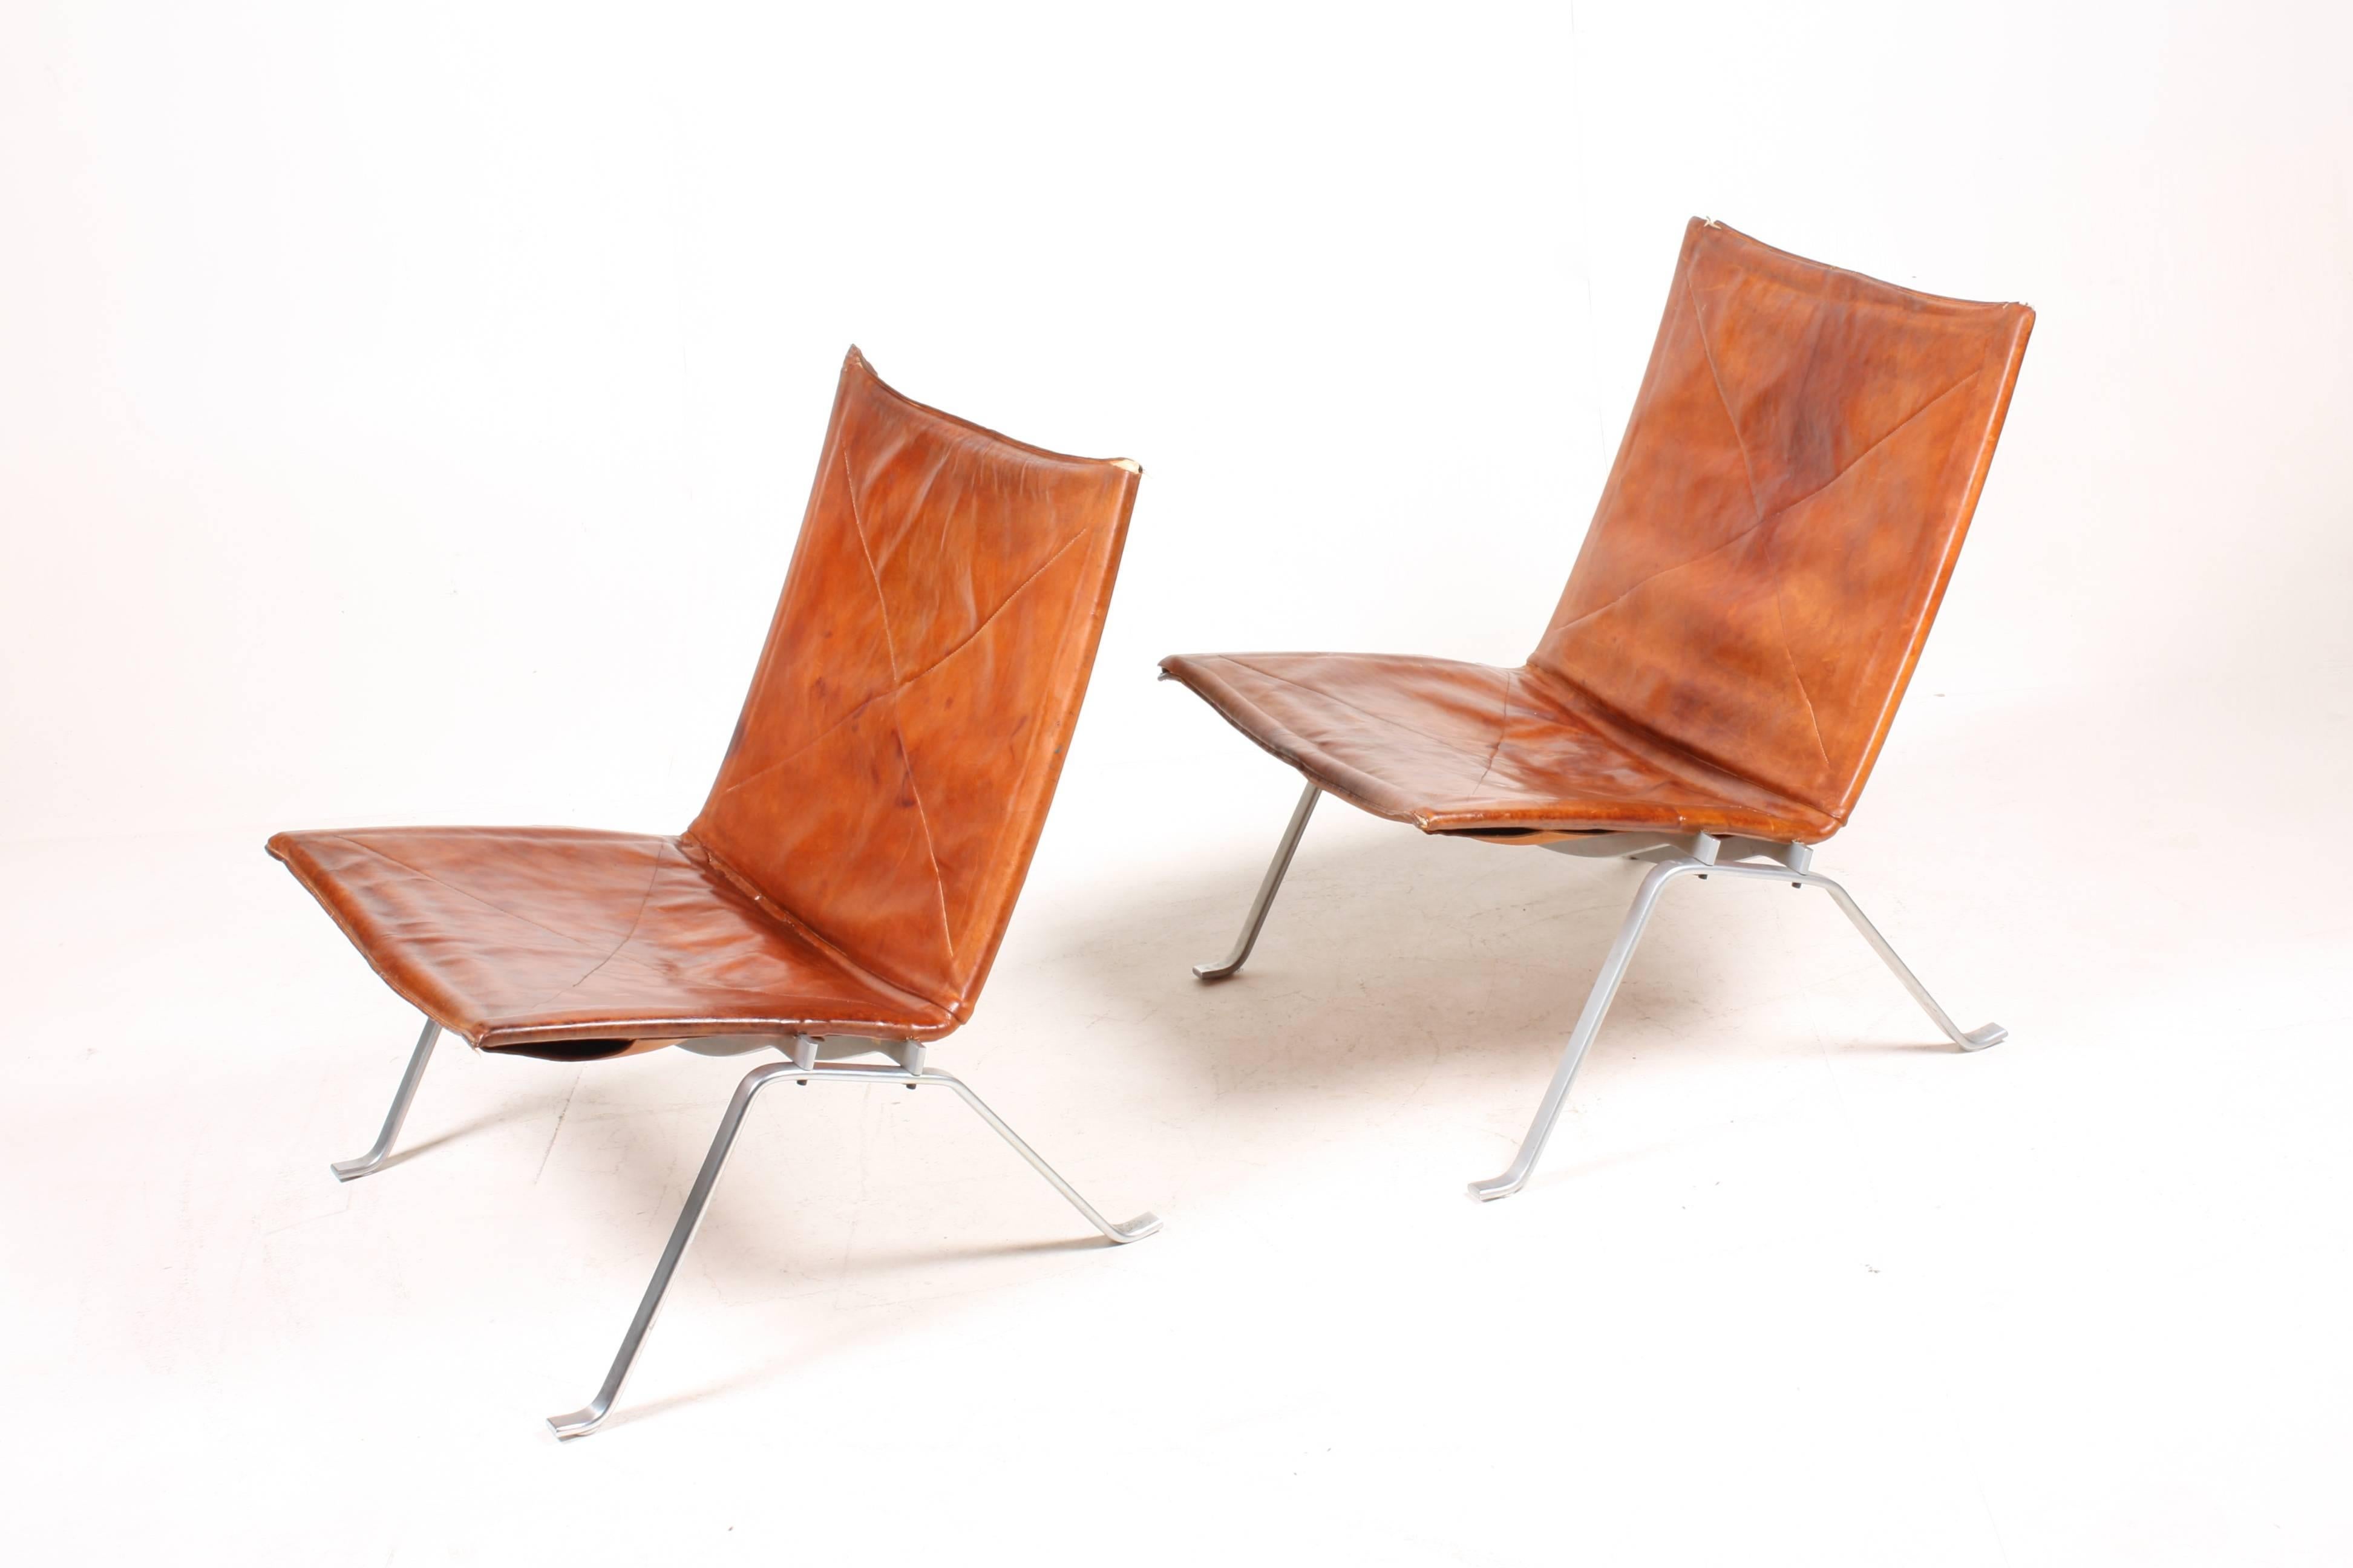 Pair of PK 22 lounge chairs designed by Poul Kjærholm for E. Kold Christensen in 1958. The chairs are in natural leather with unique color. The condition is all original / beat up. Made in Denmark.